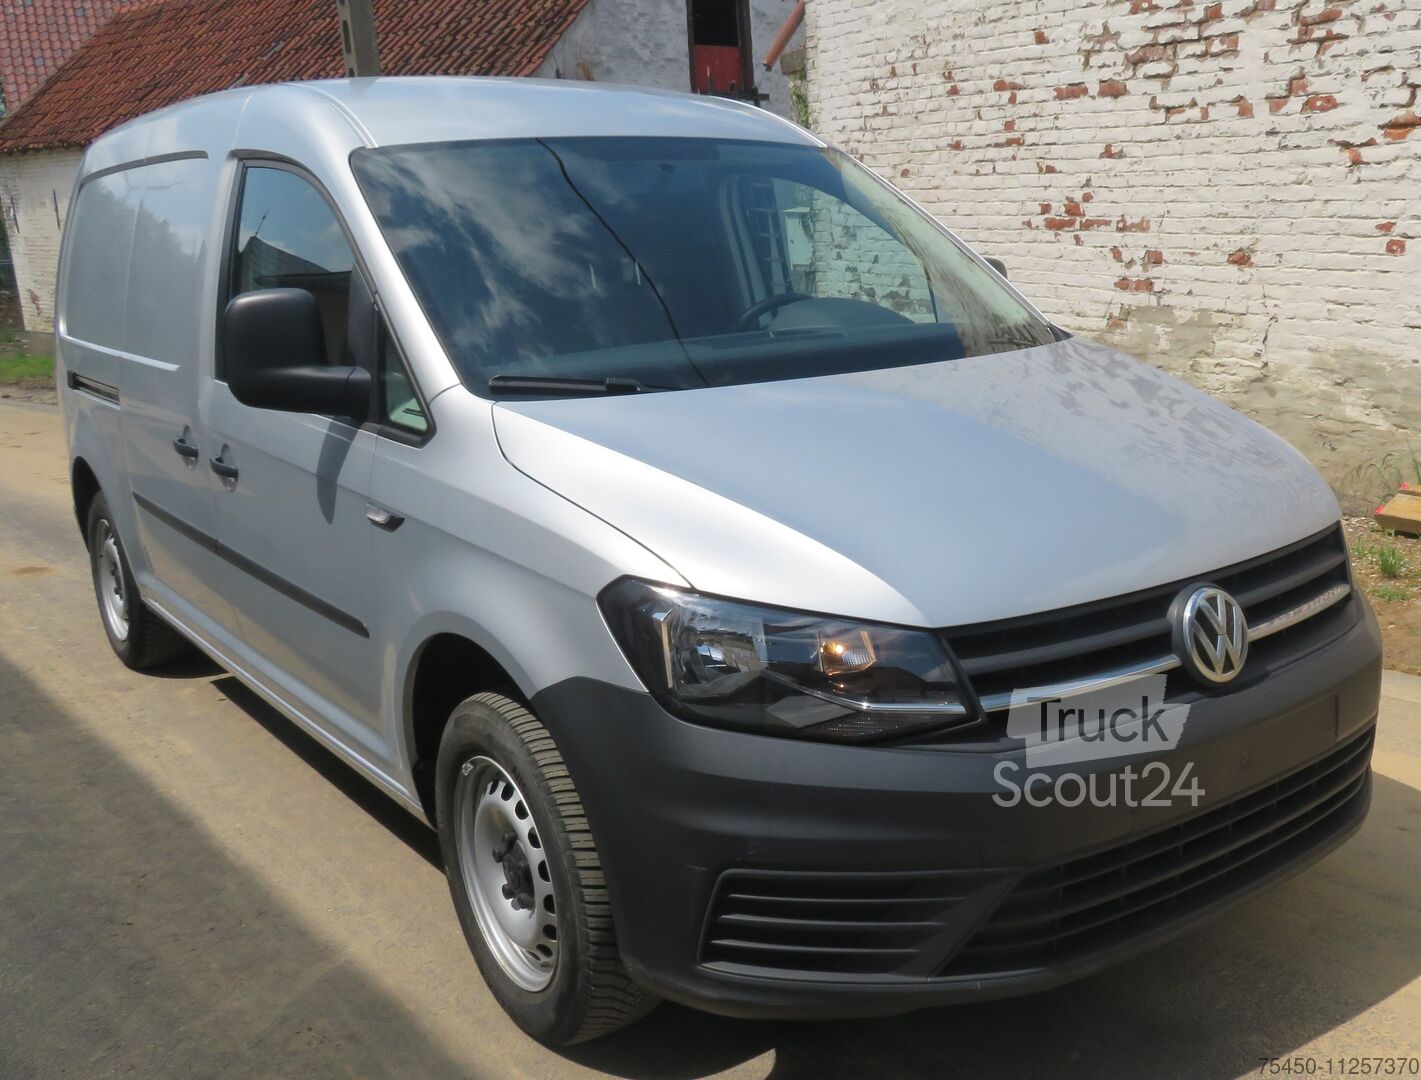 VW Caddy maxi - 102pk buy used - Offer on TruckScout24